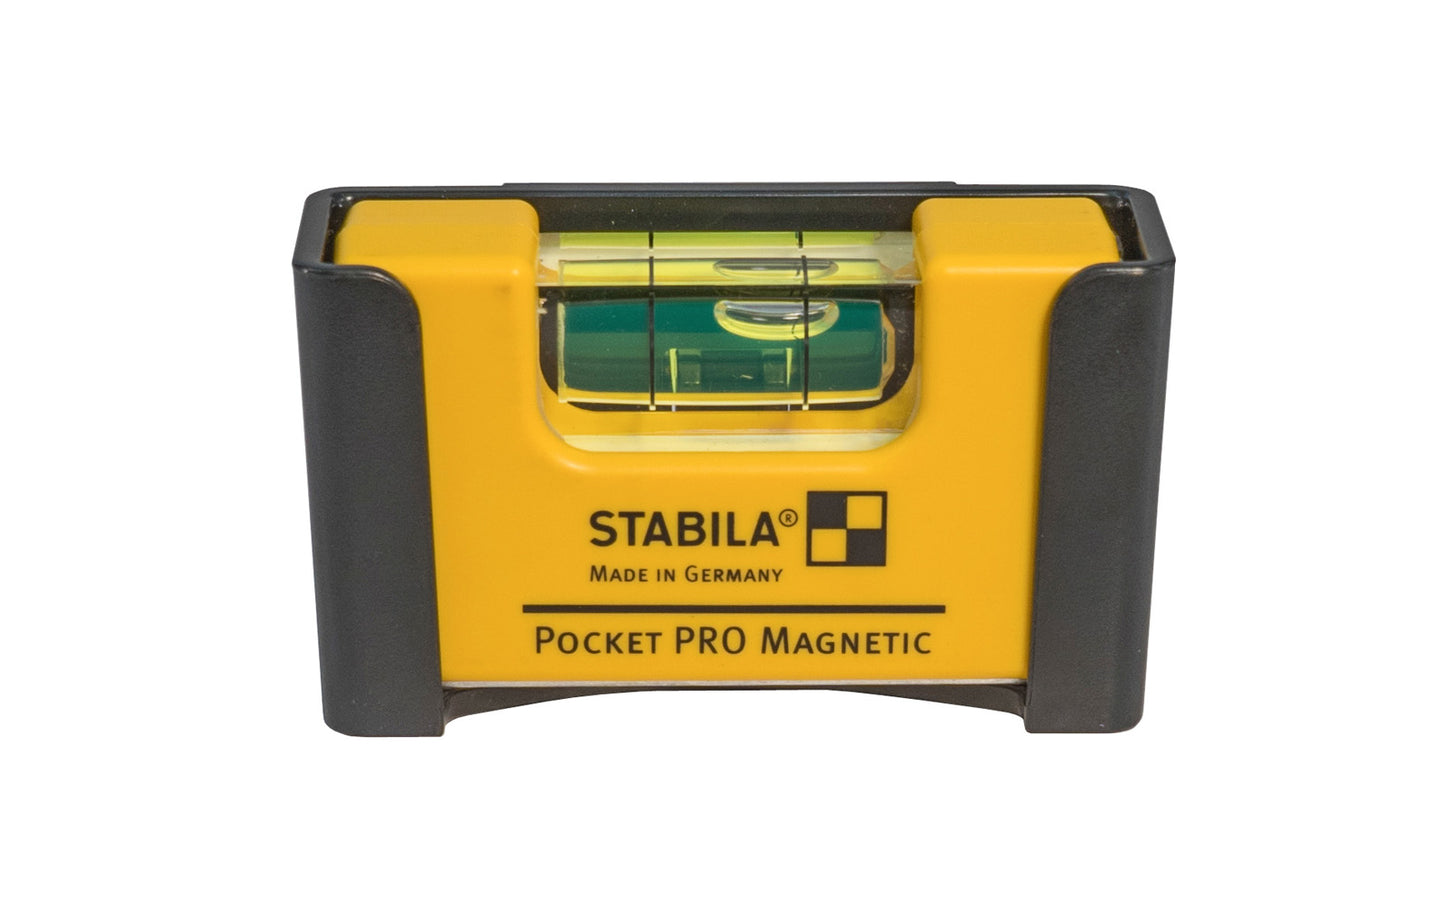 Stabila Pocket Level Pro Magnetic ~ Mini Level - Made in Germany - 2-1/2" long ~ Model No. 11901 - Professional mini-format spirit level with tough rectangular aluminium core housing & two precision-milled measuring surfaces with V-groove for horizontal & vertical measurements on flat & round surfaces 